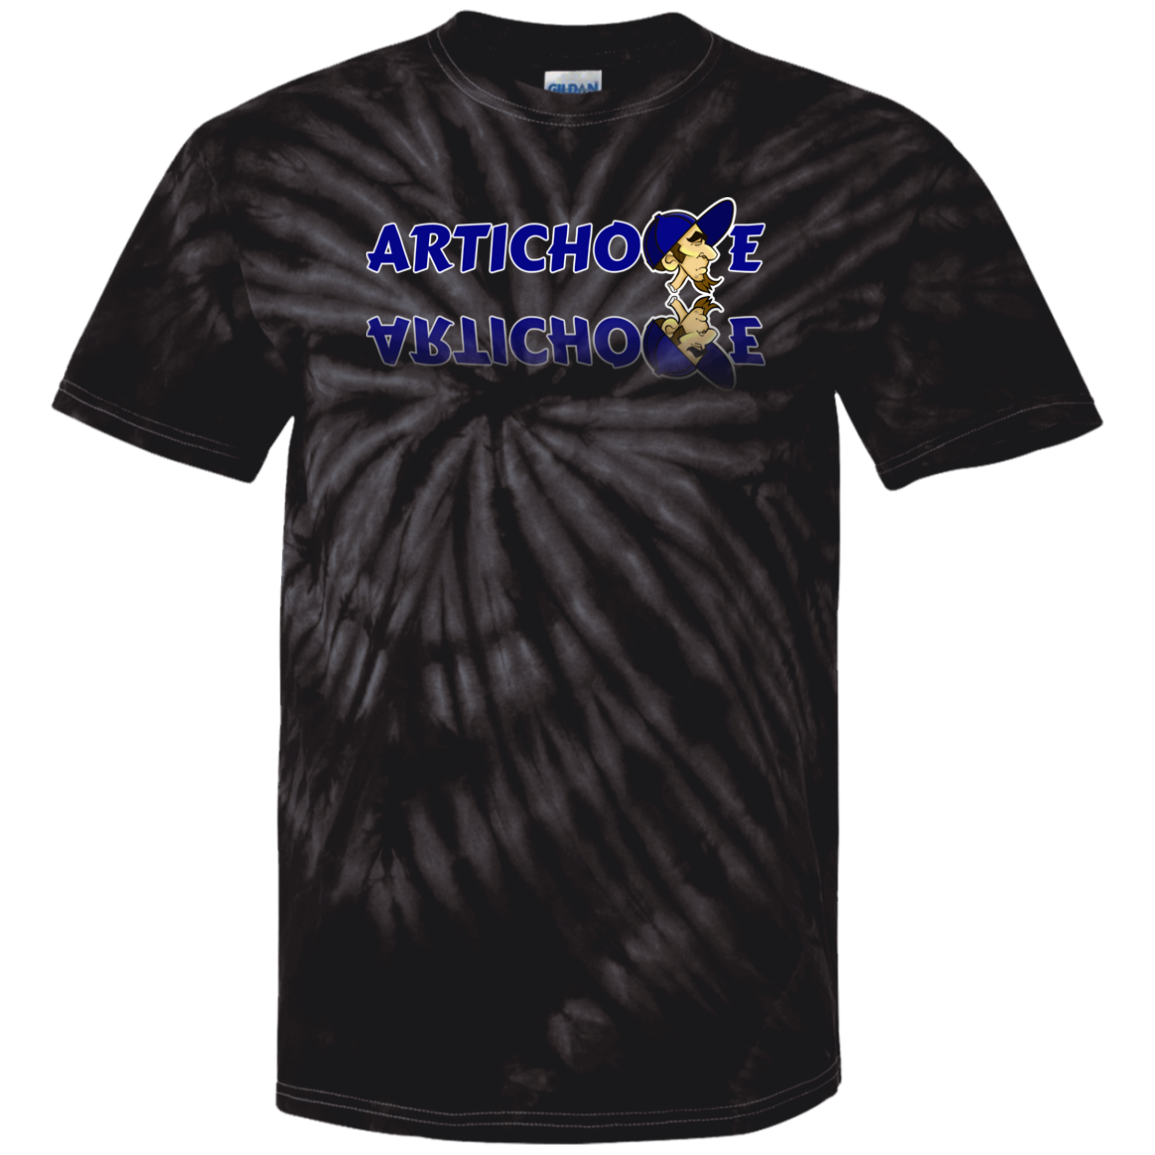 ZZ#20 ArtichokeUSA Characters and Fonts. "Clem" Let’s Create Your Own Design Today. 100% Cotton Tie Dye T-Shirt